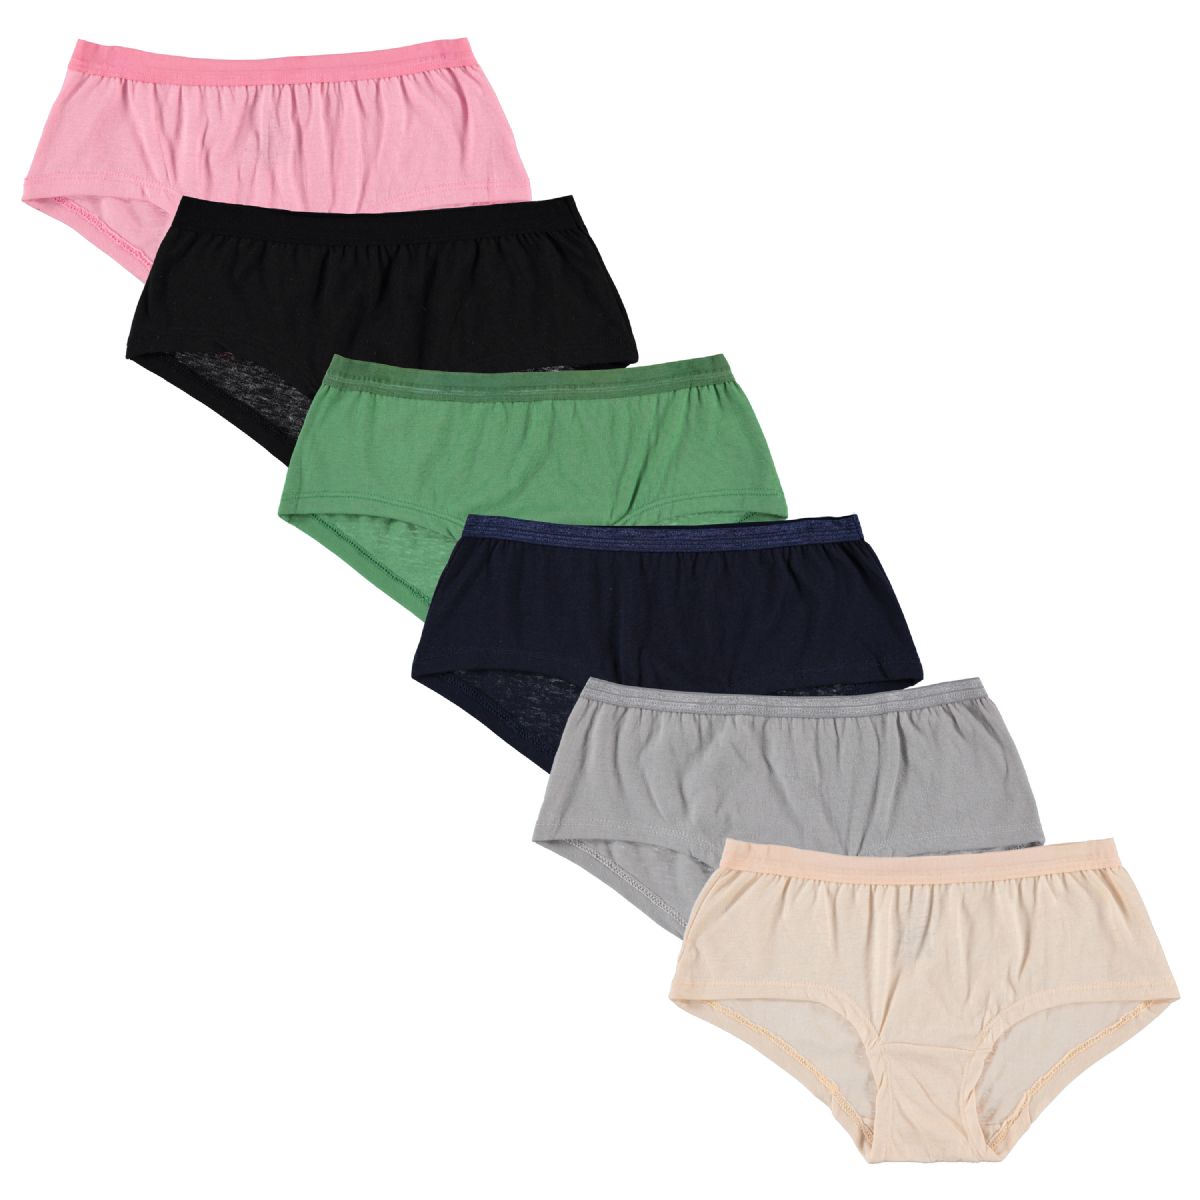 12 Pieces Yacht & Smith Womens Cotton Blend Underwear In Assorted Colors,  Size Small - Womens Panties & Underwear - at 